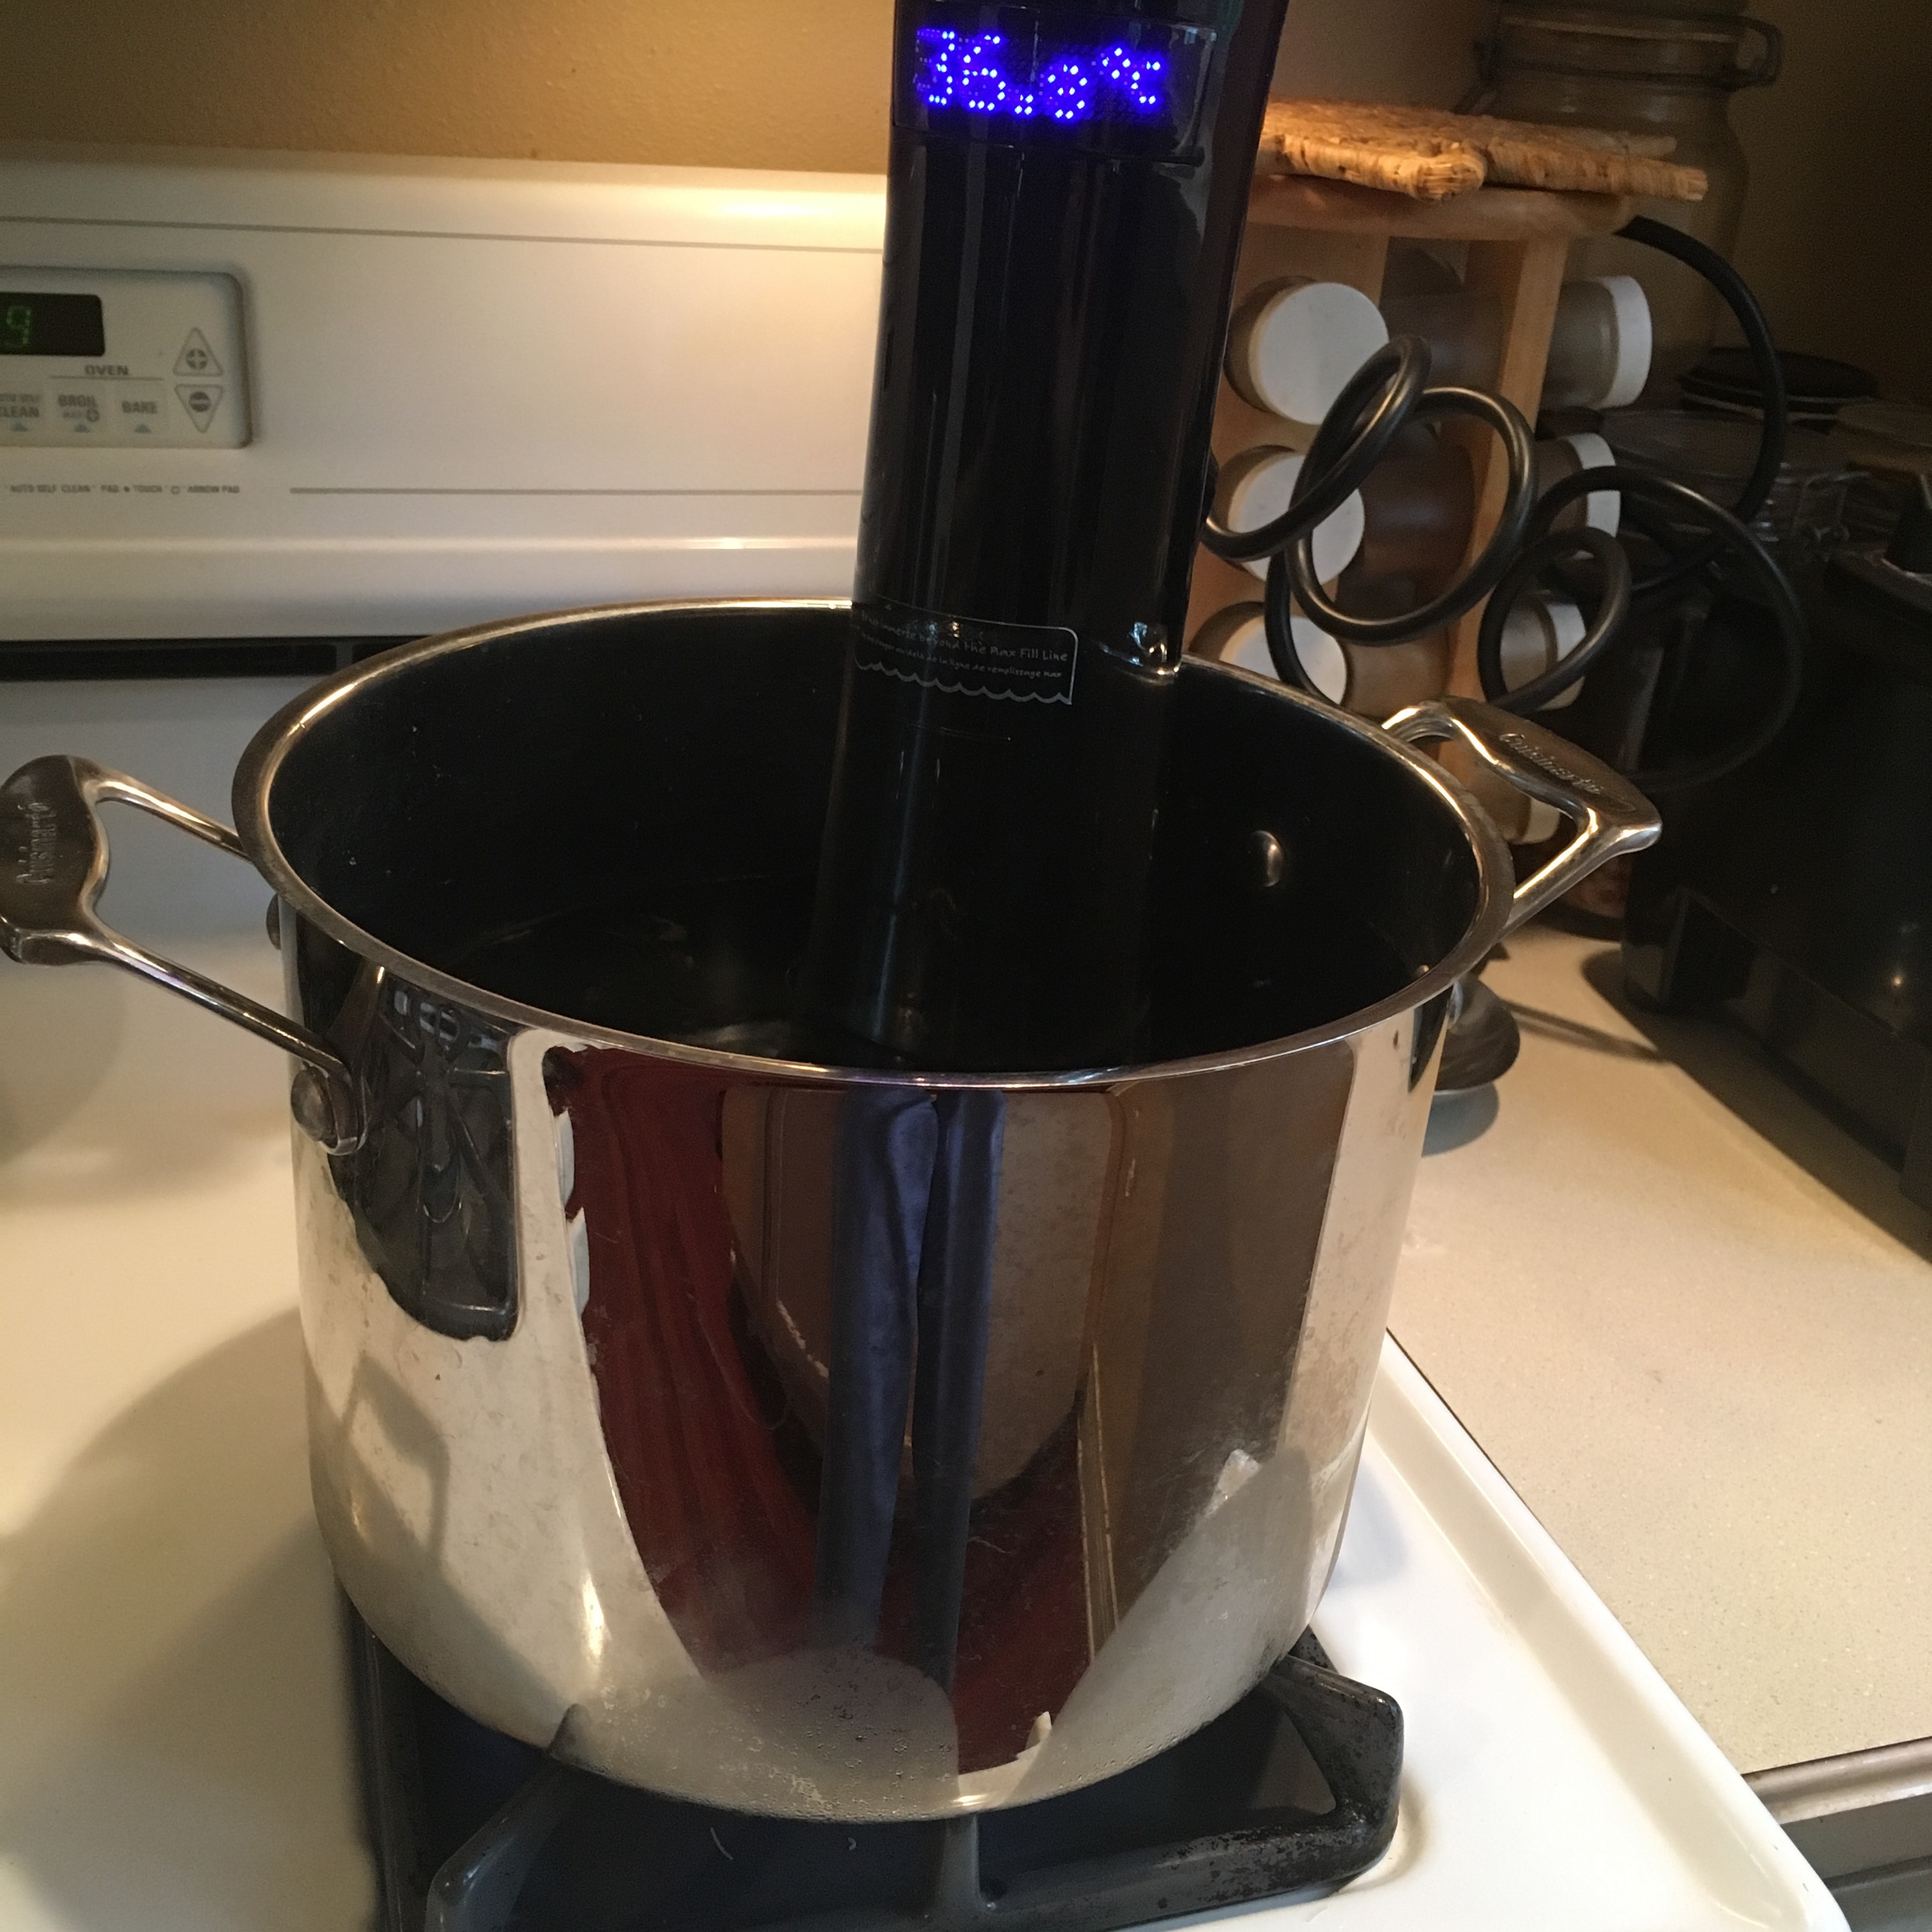 A sous vide circulator, clipped in place to a large pot of water on a stove top, stove is not on. A cord for the circulator is plugged in the wall. Photo by Imei Hsu.